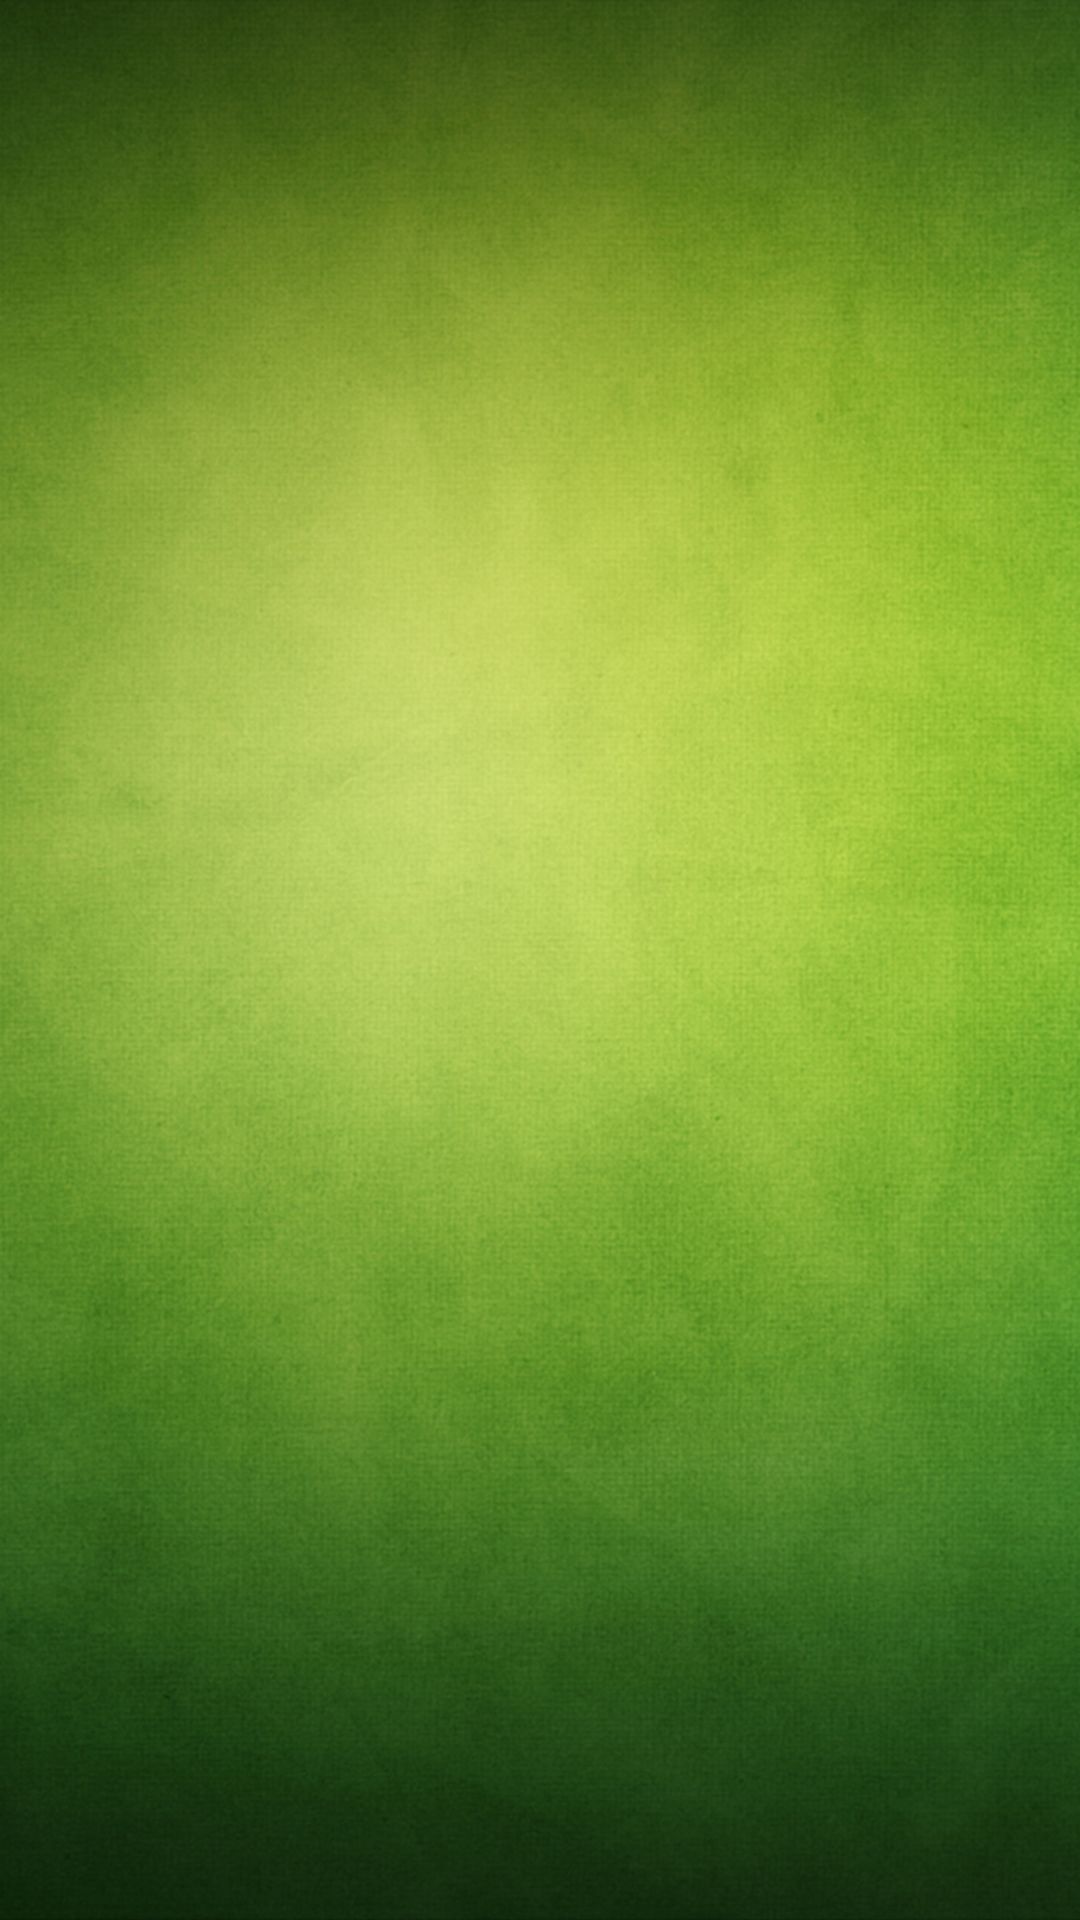 Pure Minimal Simple Green Background iPhone 7 Wallpaper Wallpaper & Background Download